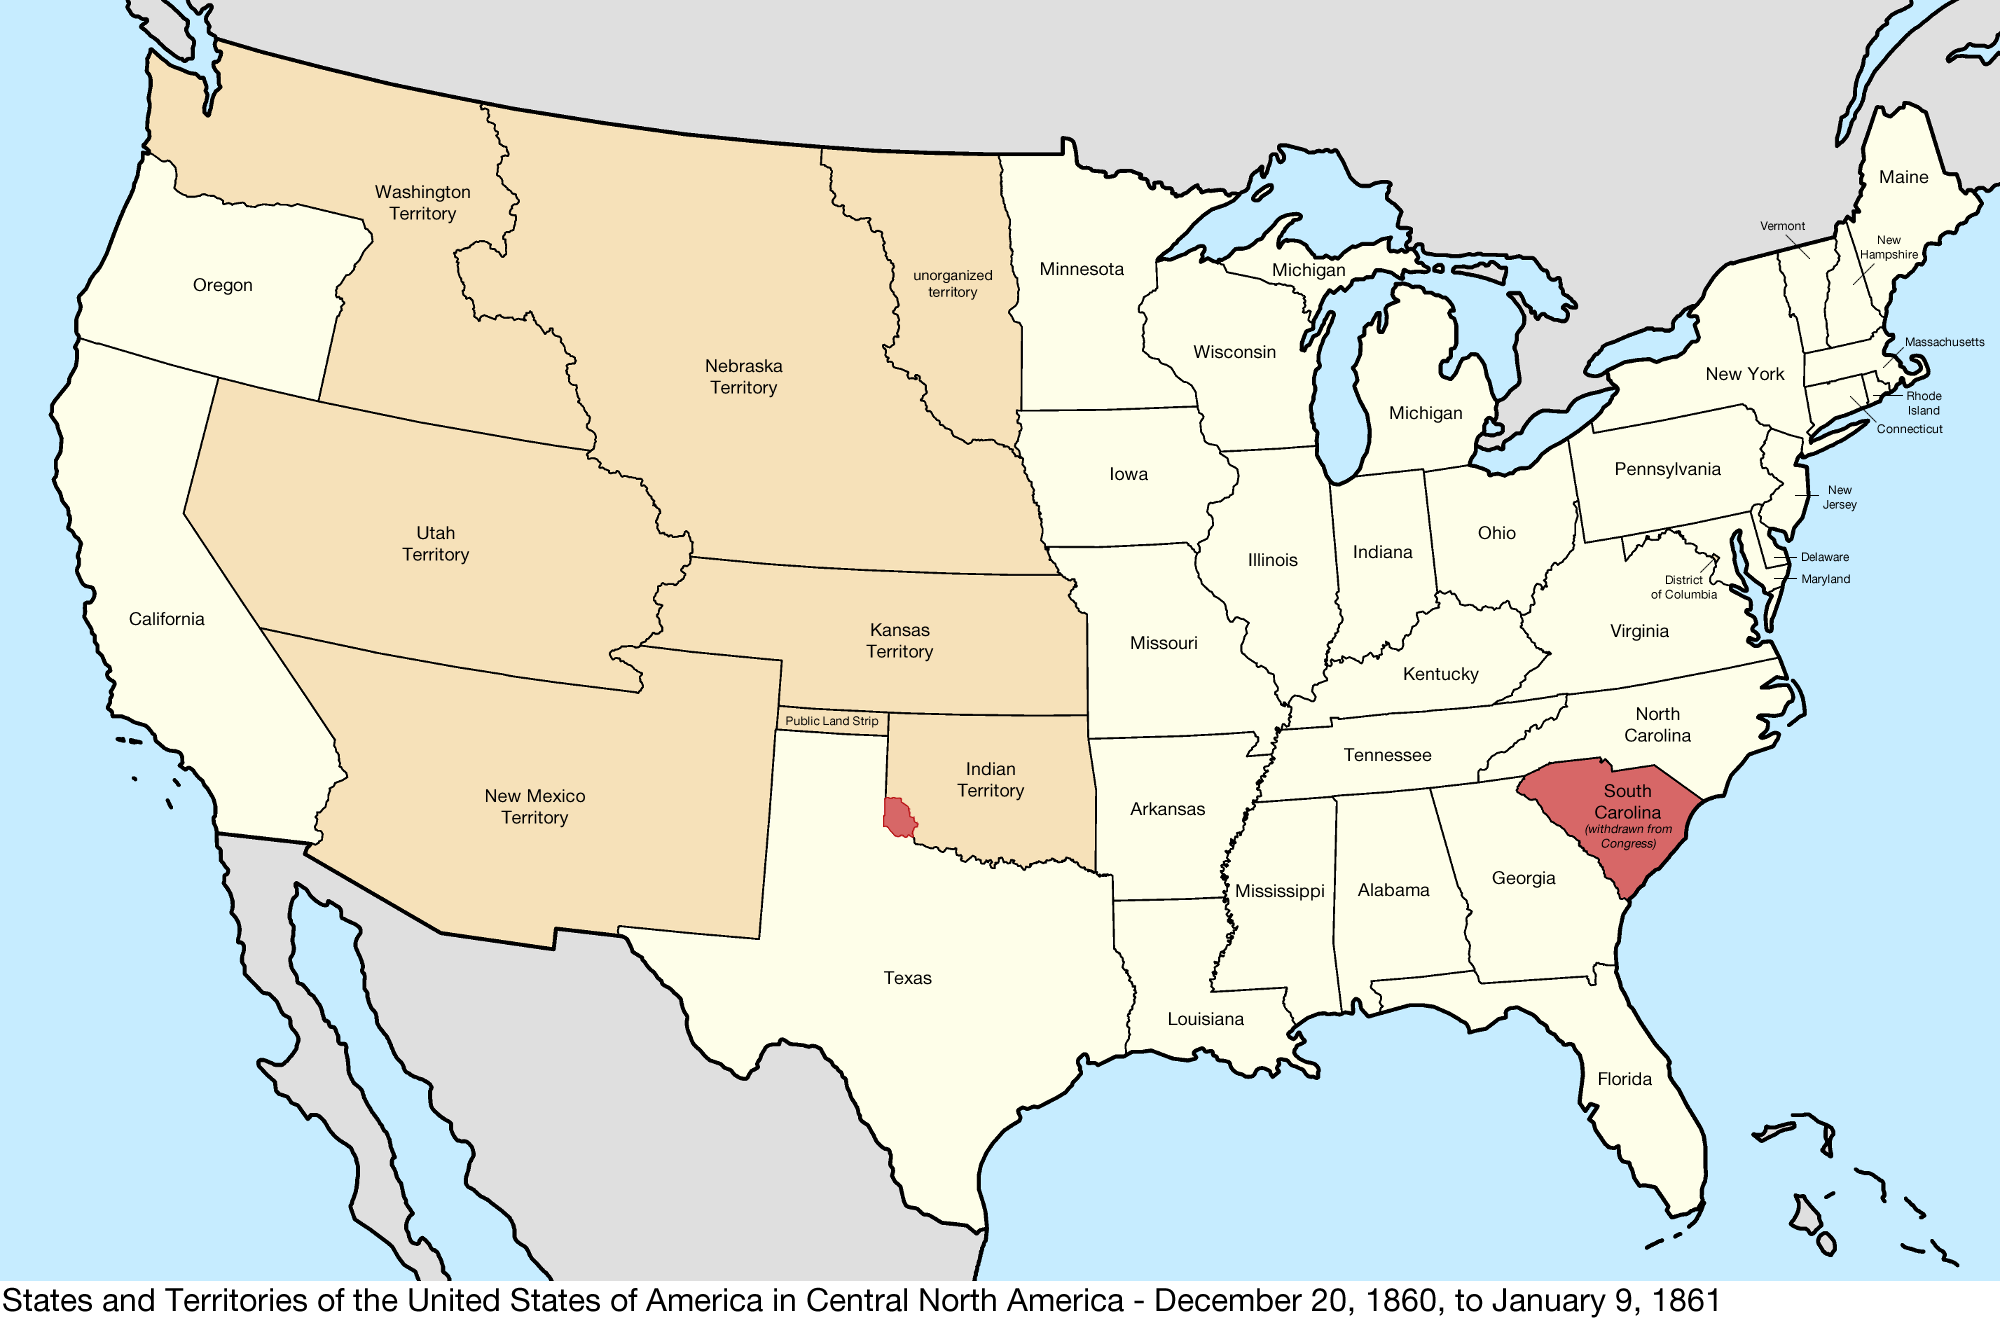 Map Of The United States In 1860 File:United States Central map 1860 12 20 to 1861 01 09.png 